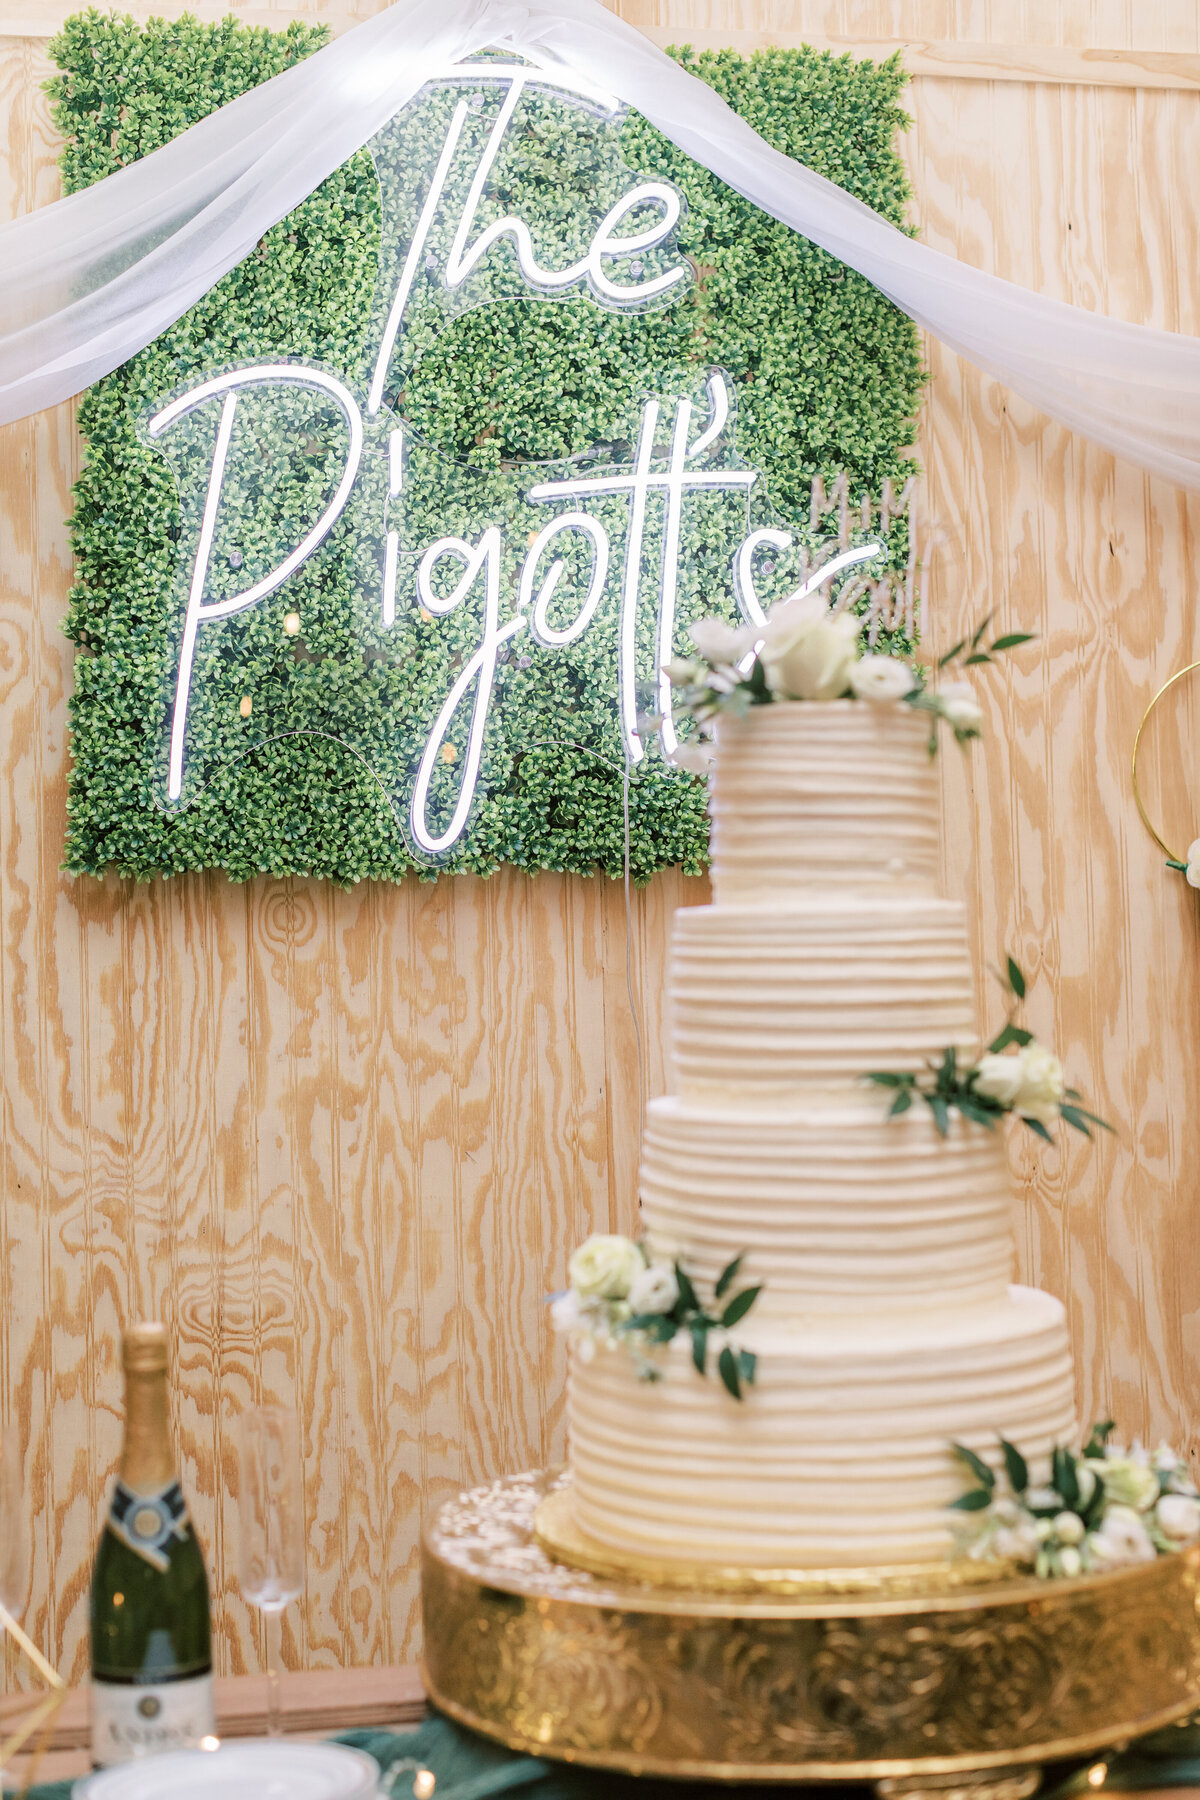 A name sign hangs on the wall behind the wedding cake.